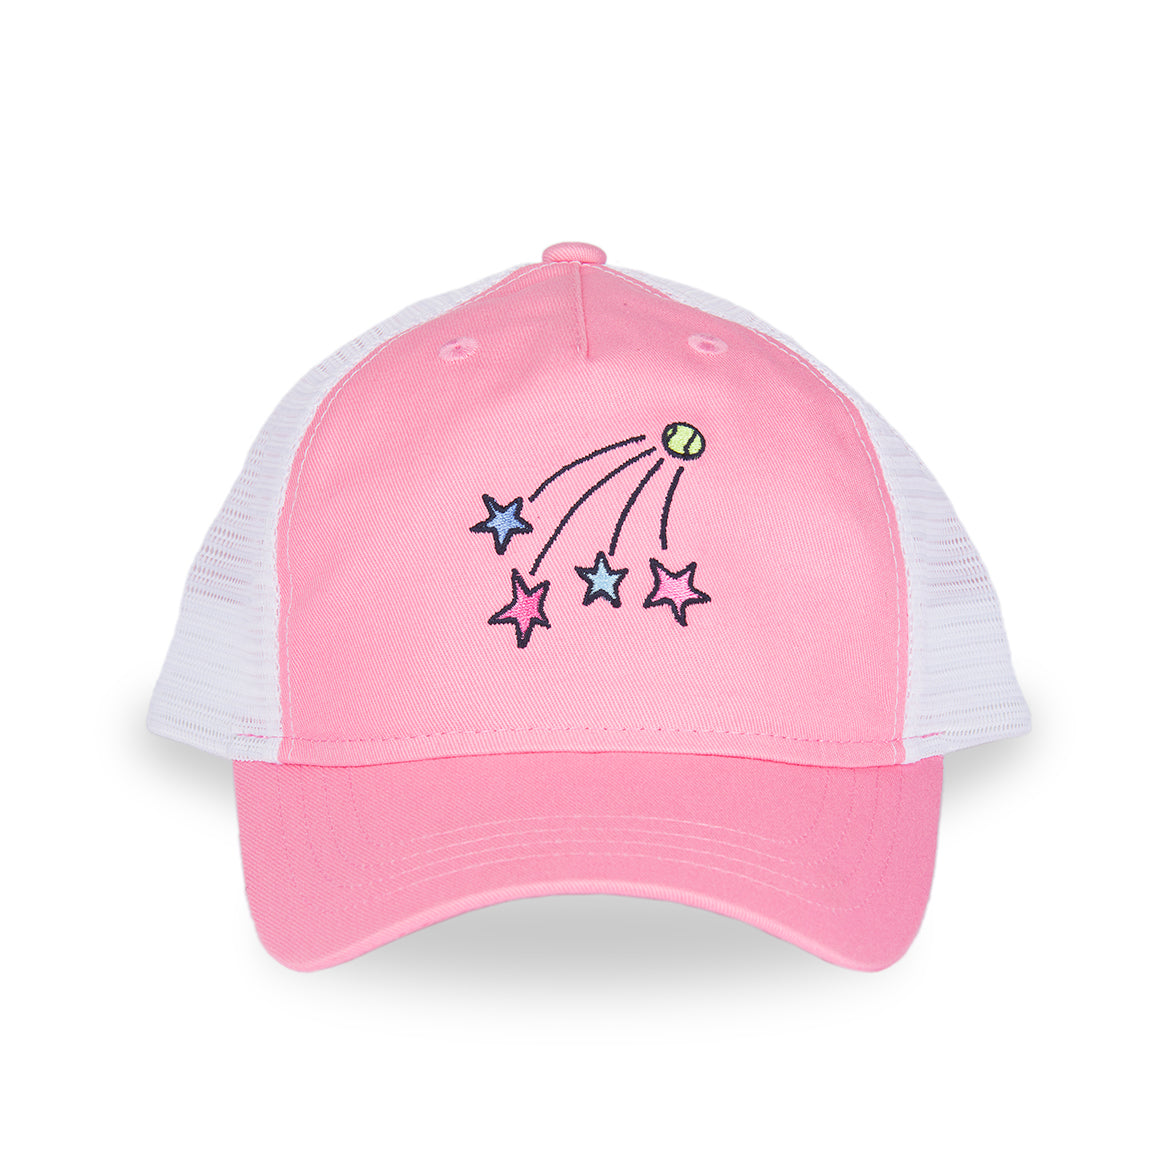 front view of pink and white kids trucker hat with shooting stars embroidered on the front